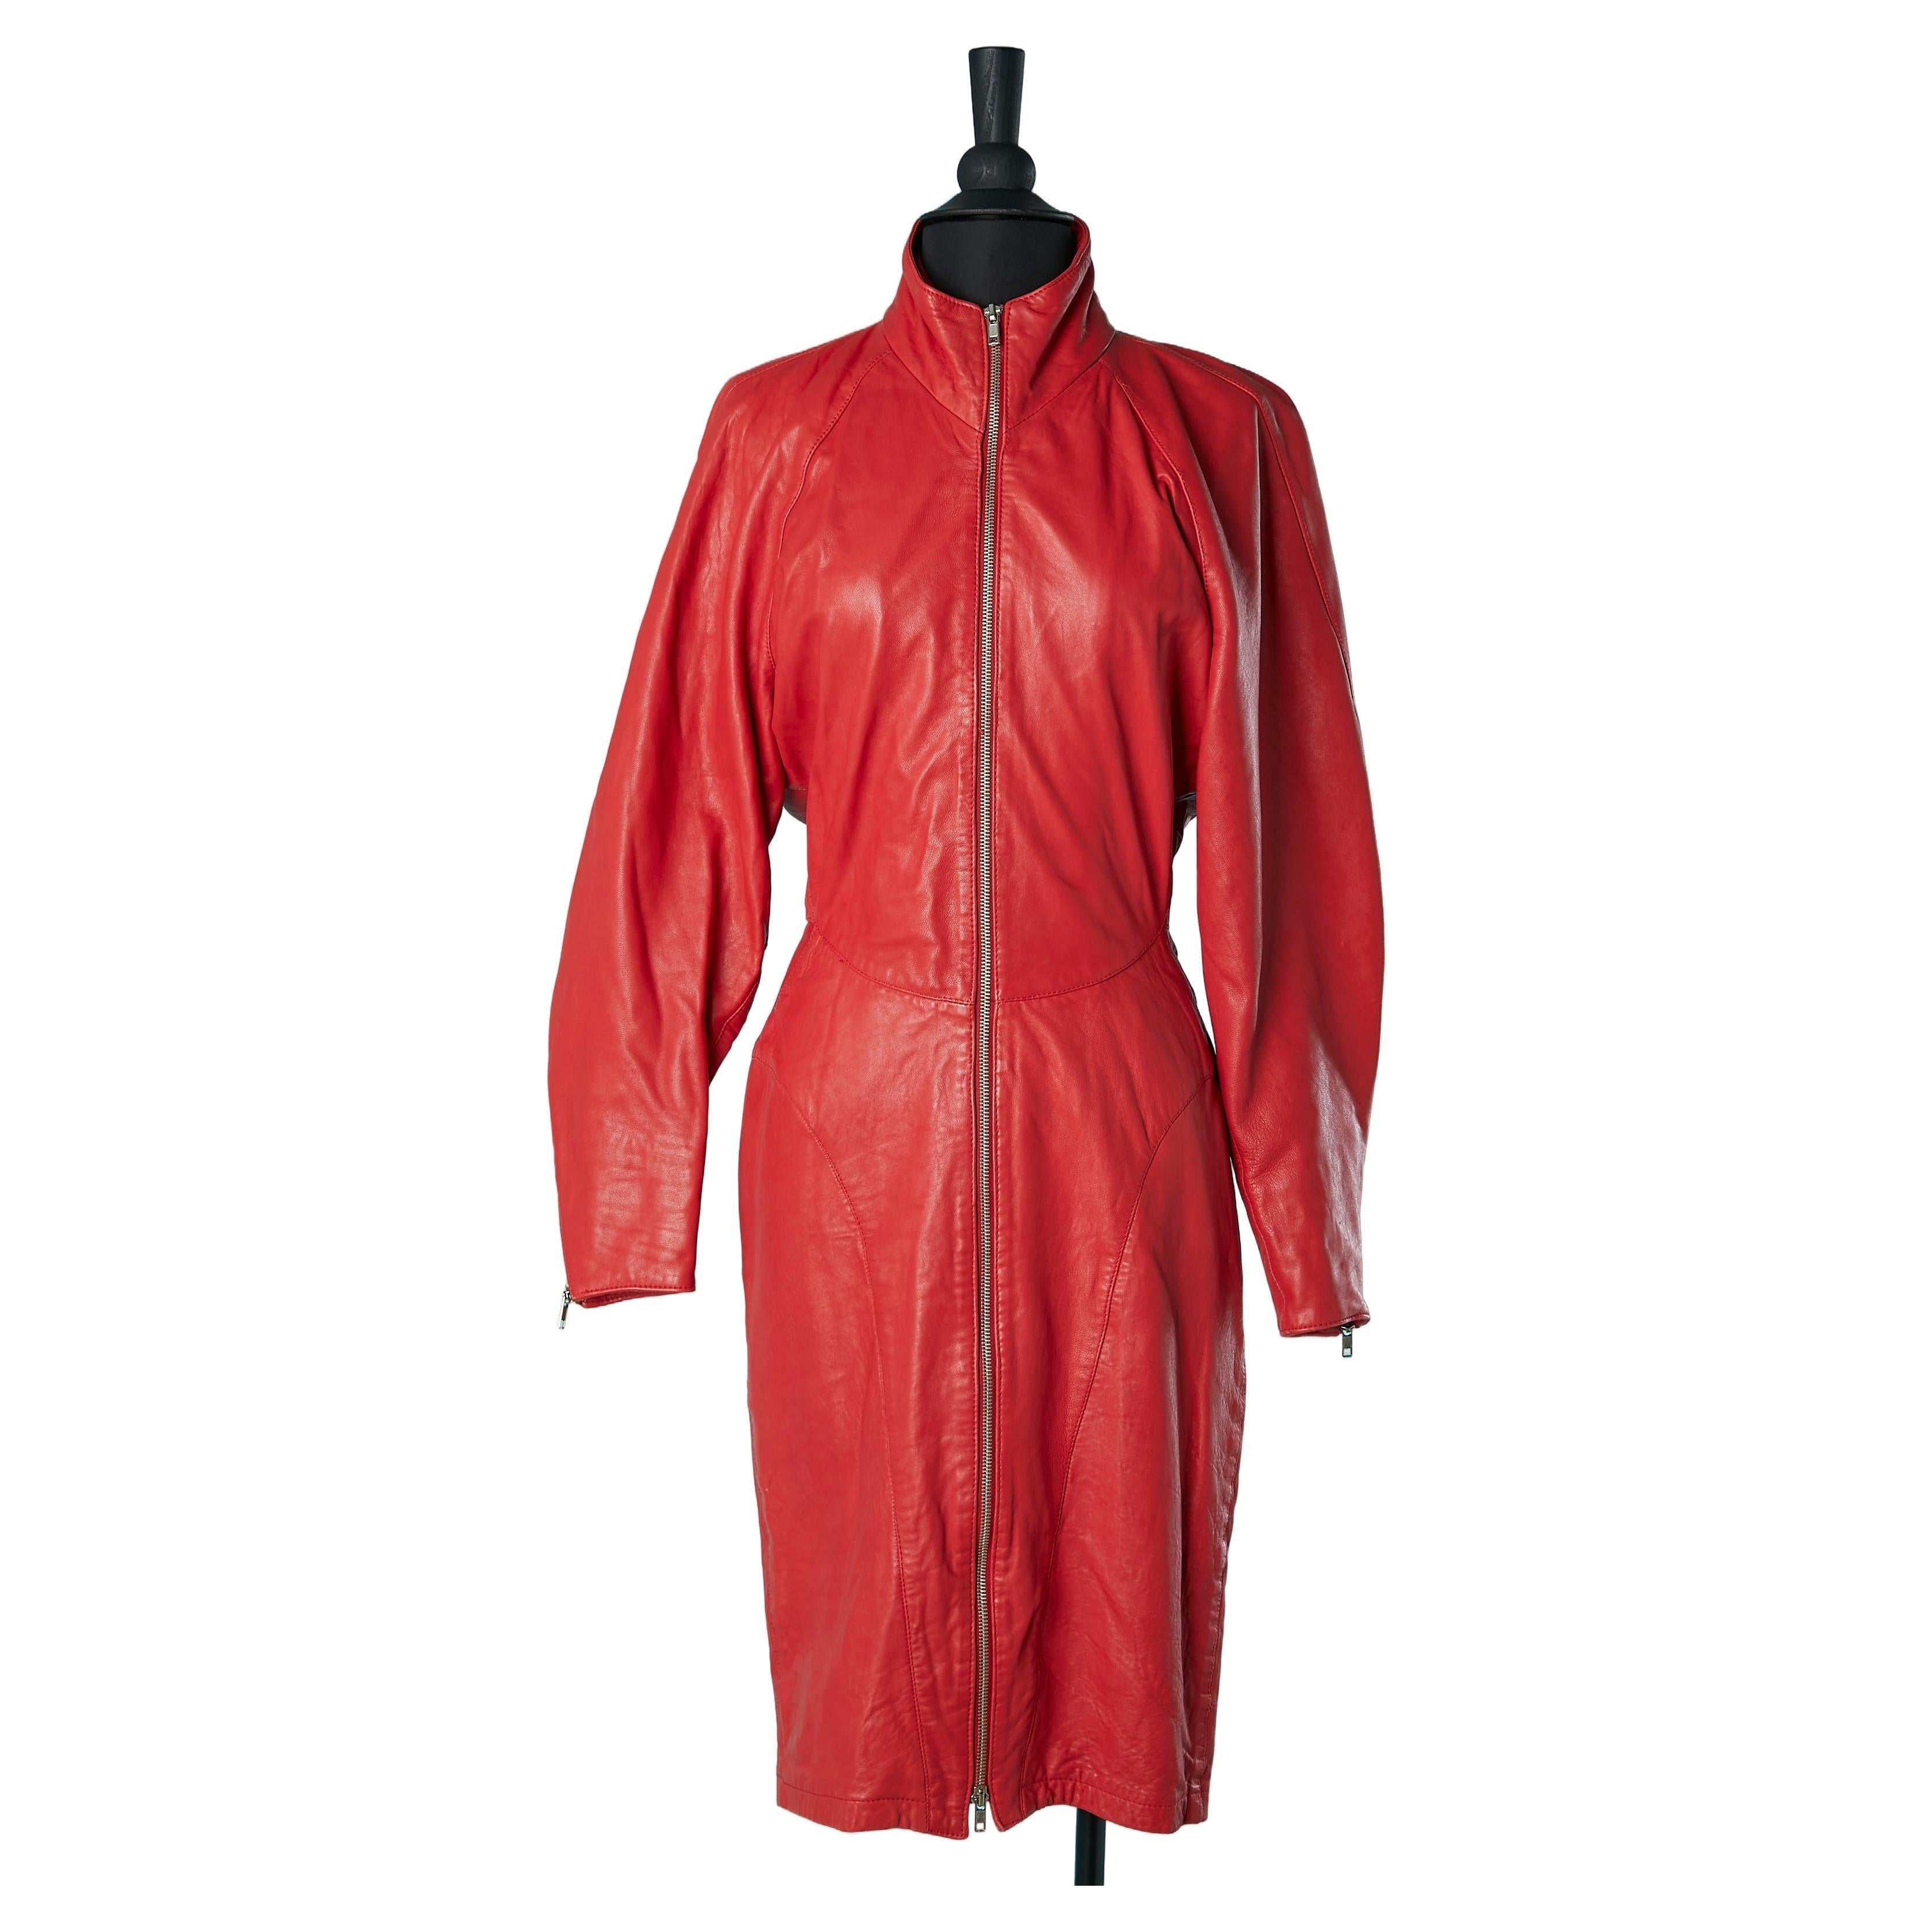 Red leather dress with zip in the middle front M.Hoban for North Beach Leather  For Sale